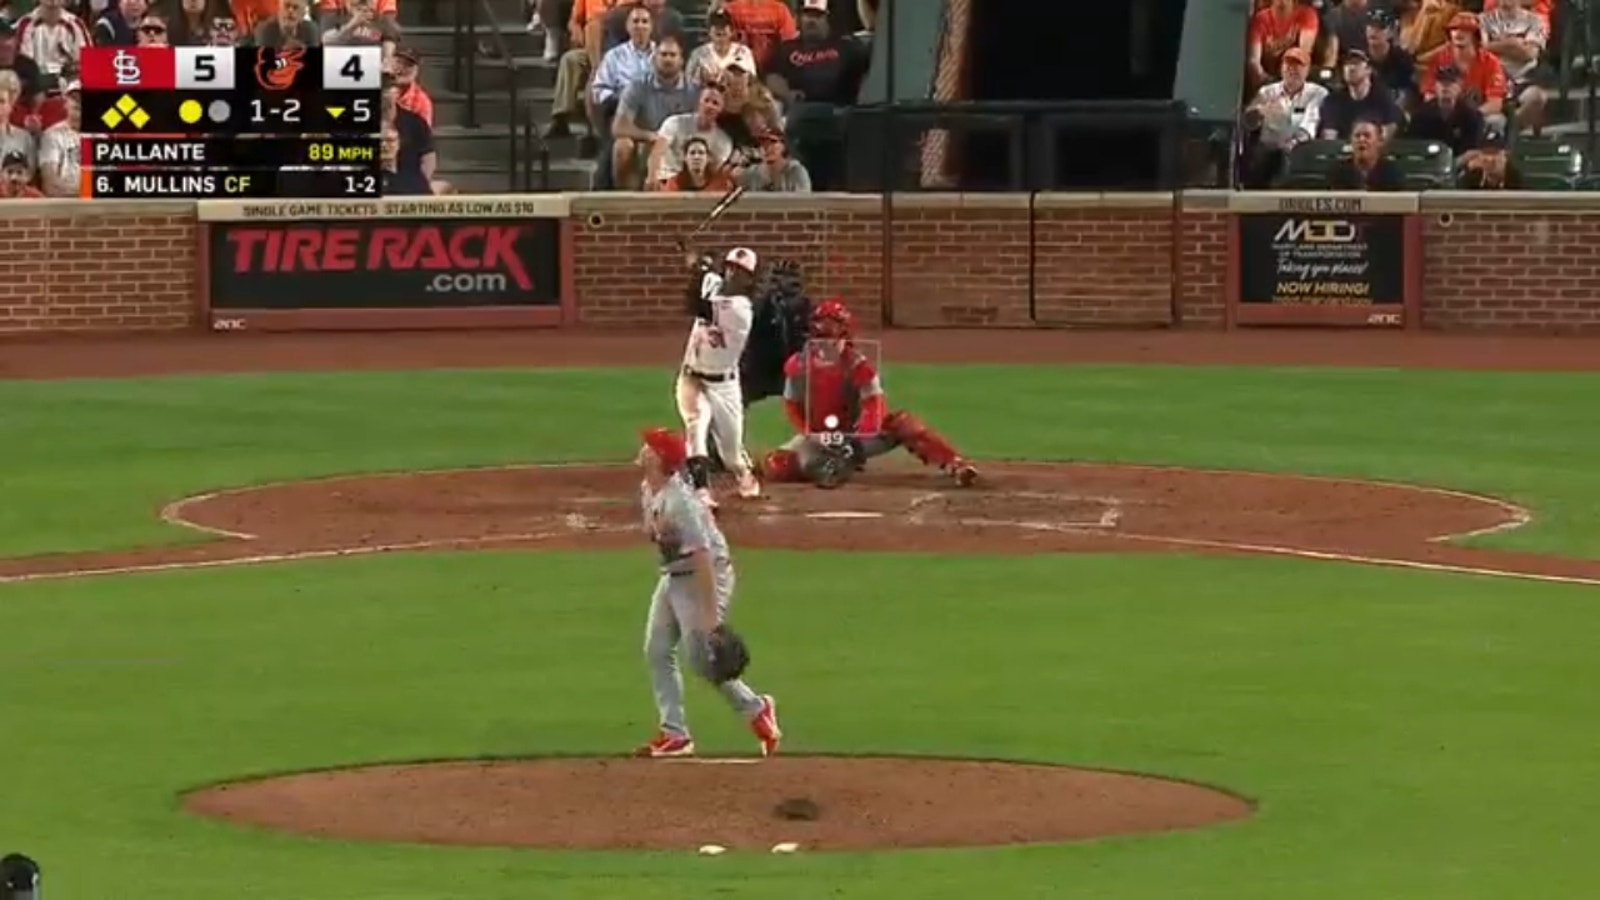 Cedric Mullins hits GRAND SLAM to give Orioles lead over Cardinals